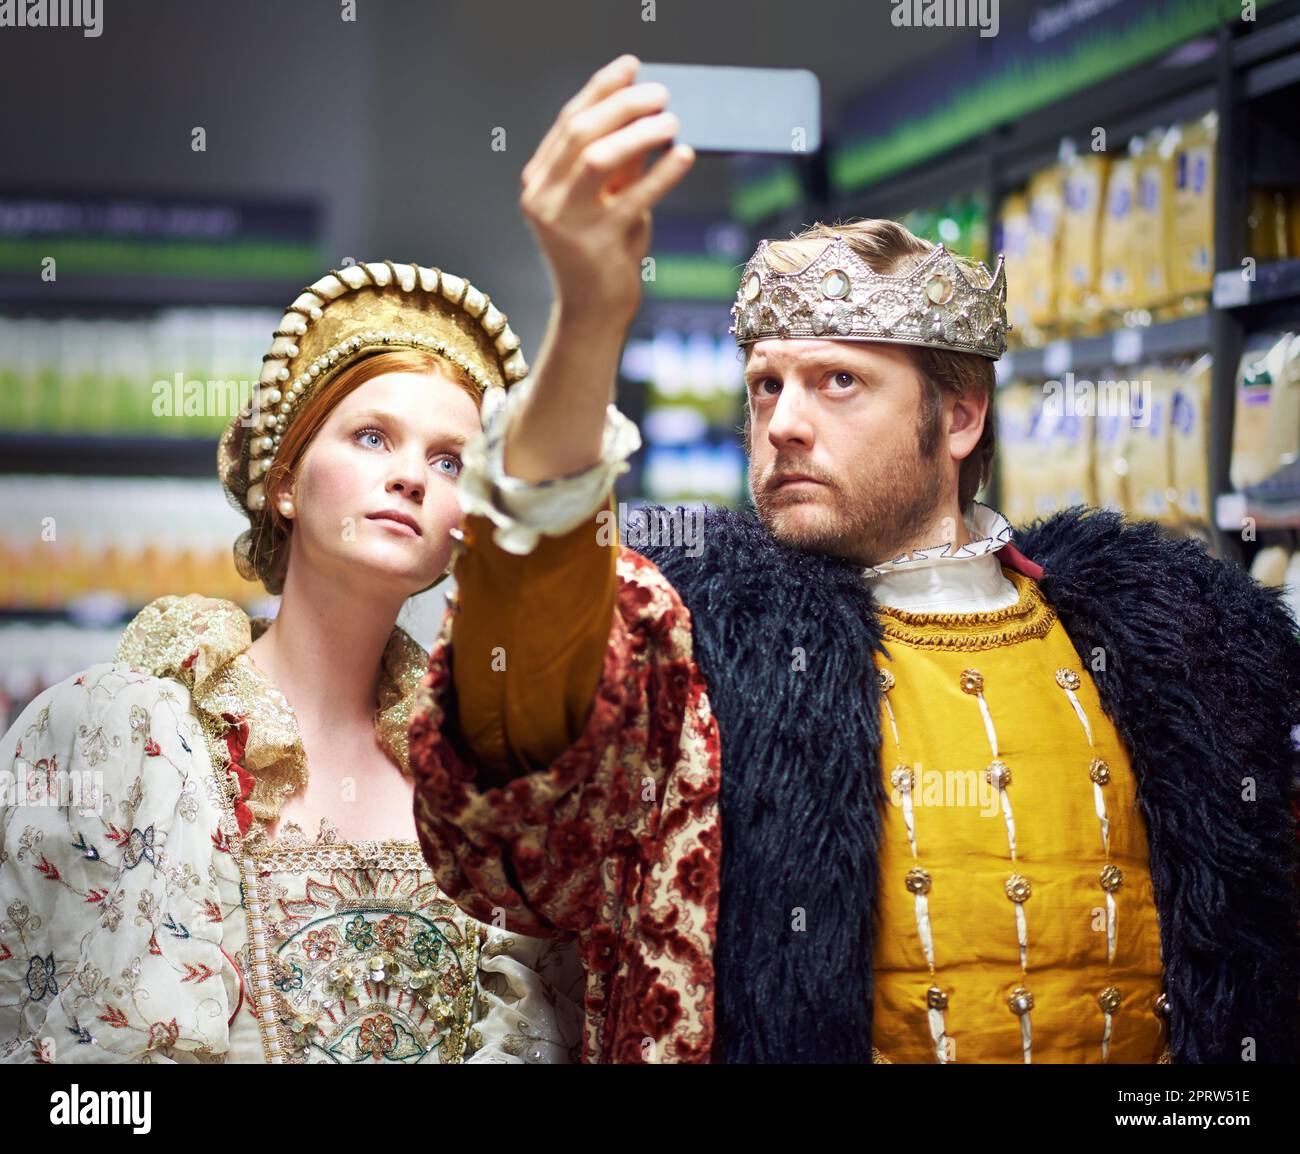 Not too royal to shop. A king and queen taking a selfie in their local supermarket. Stock Photo